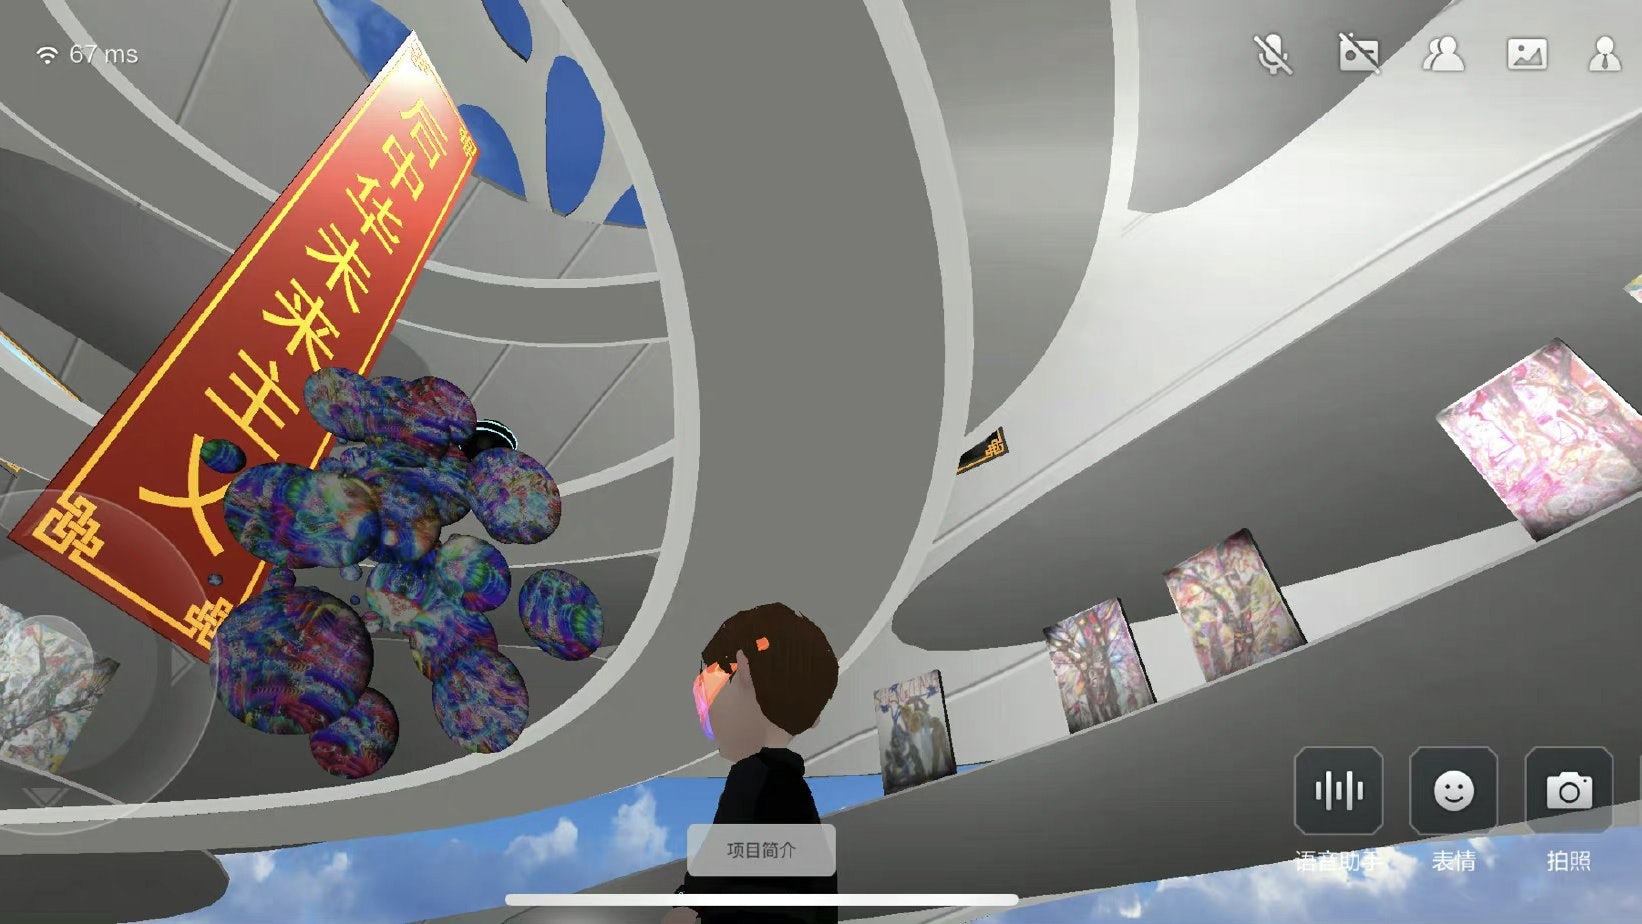 China's new metaverse approach is to “use the virtual to enhance the real." How will this impact luxury brands' Web3 activities? Photo: Screenshot of Meta Ziwu via Weibo @文创路由器